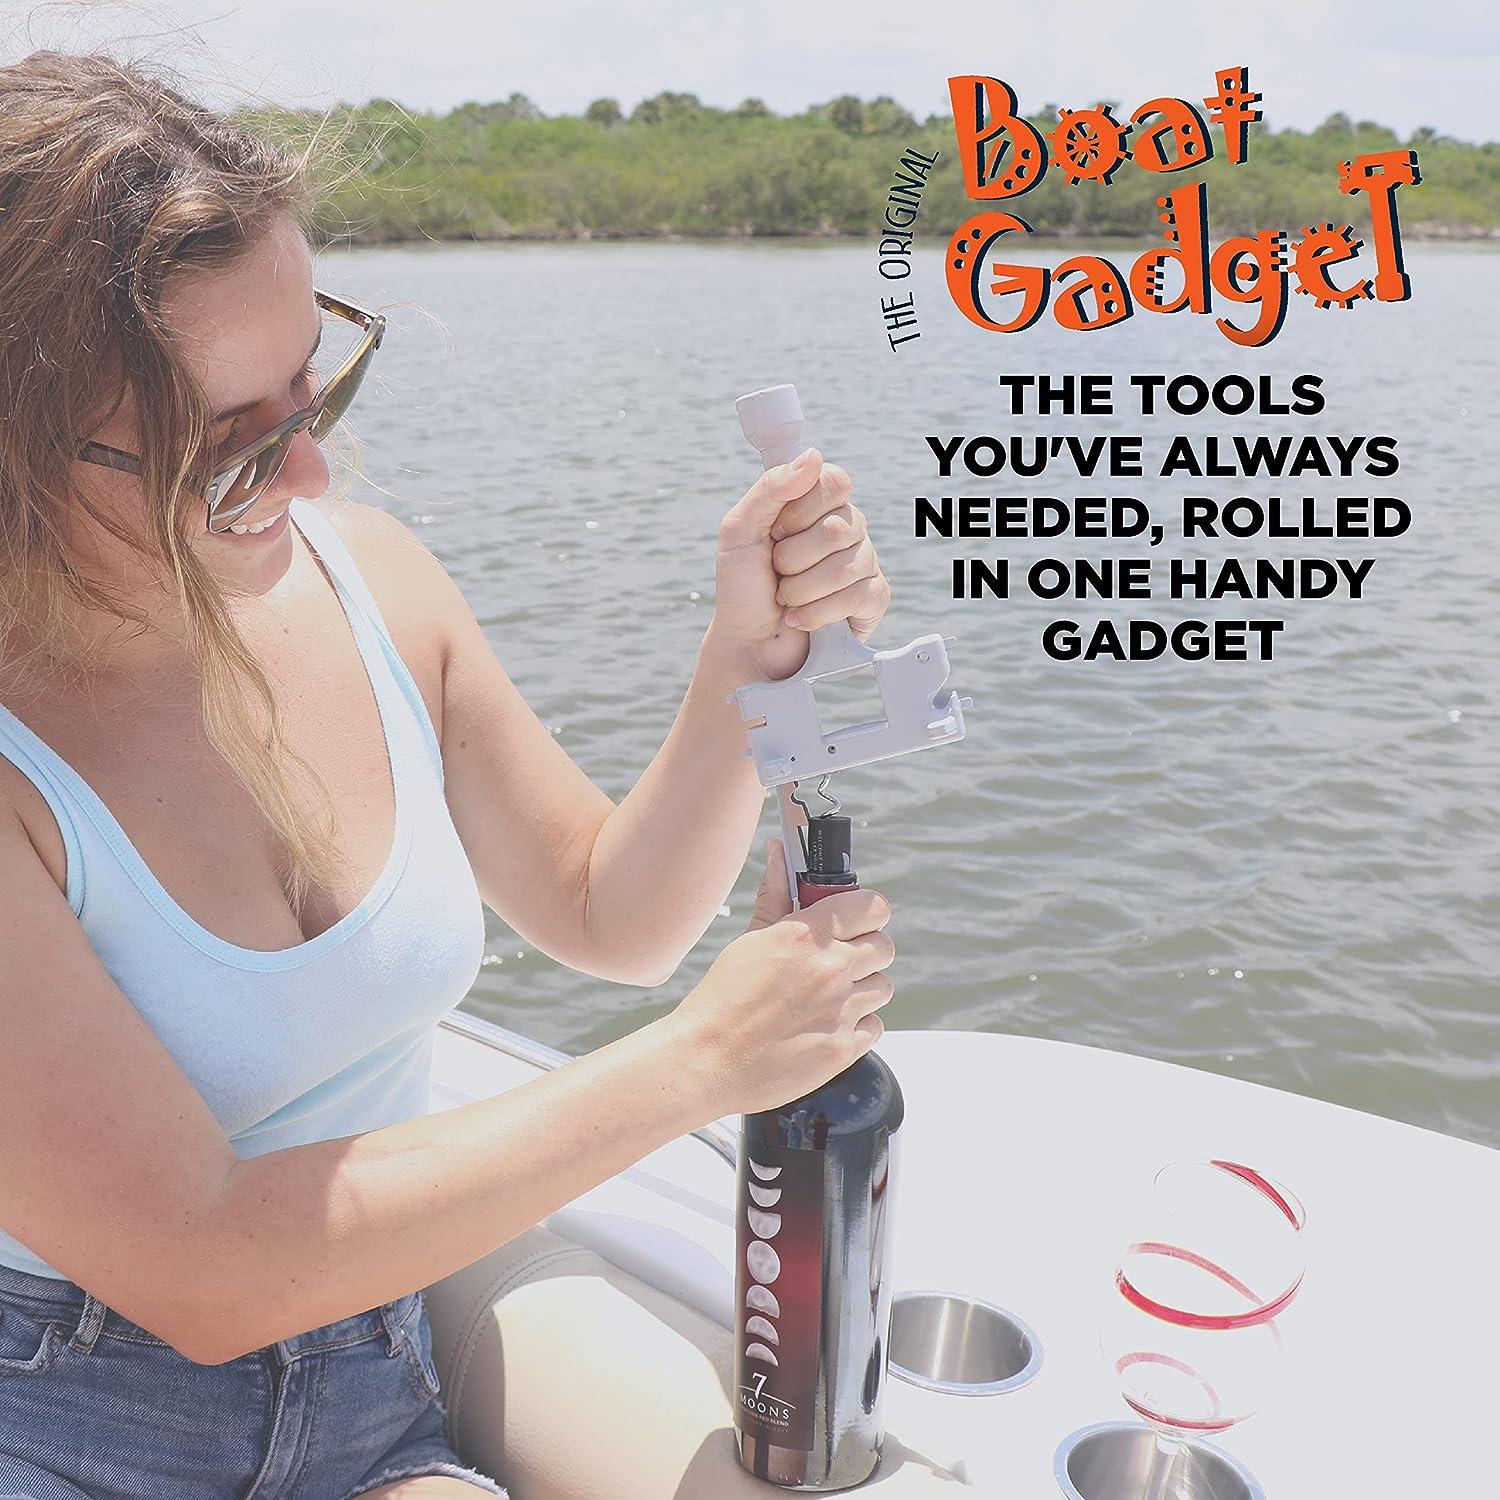 Boat Gadget This 10-in-1 Boat Tool Includes Beer and Wine Bottle